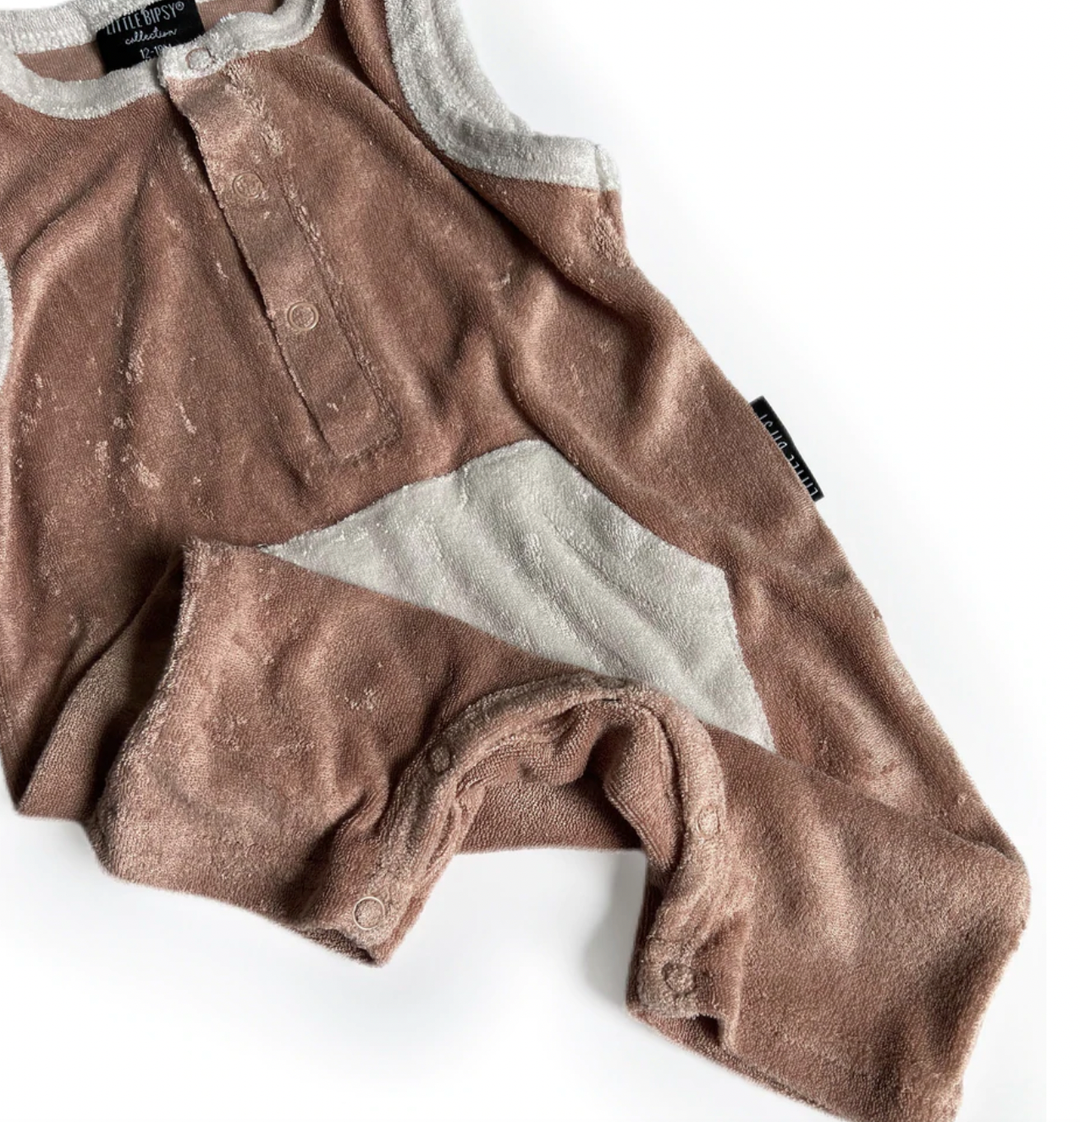 Little Bipsy - Terry Cloth Shorty Romper in Cinnamon